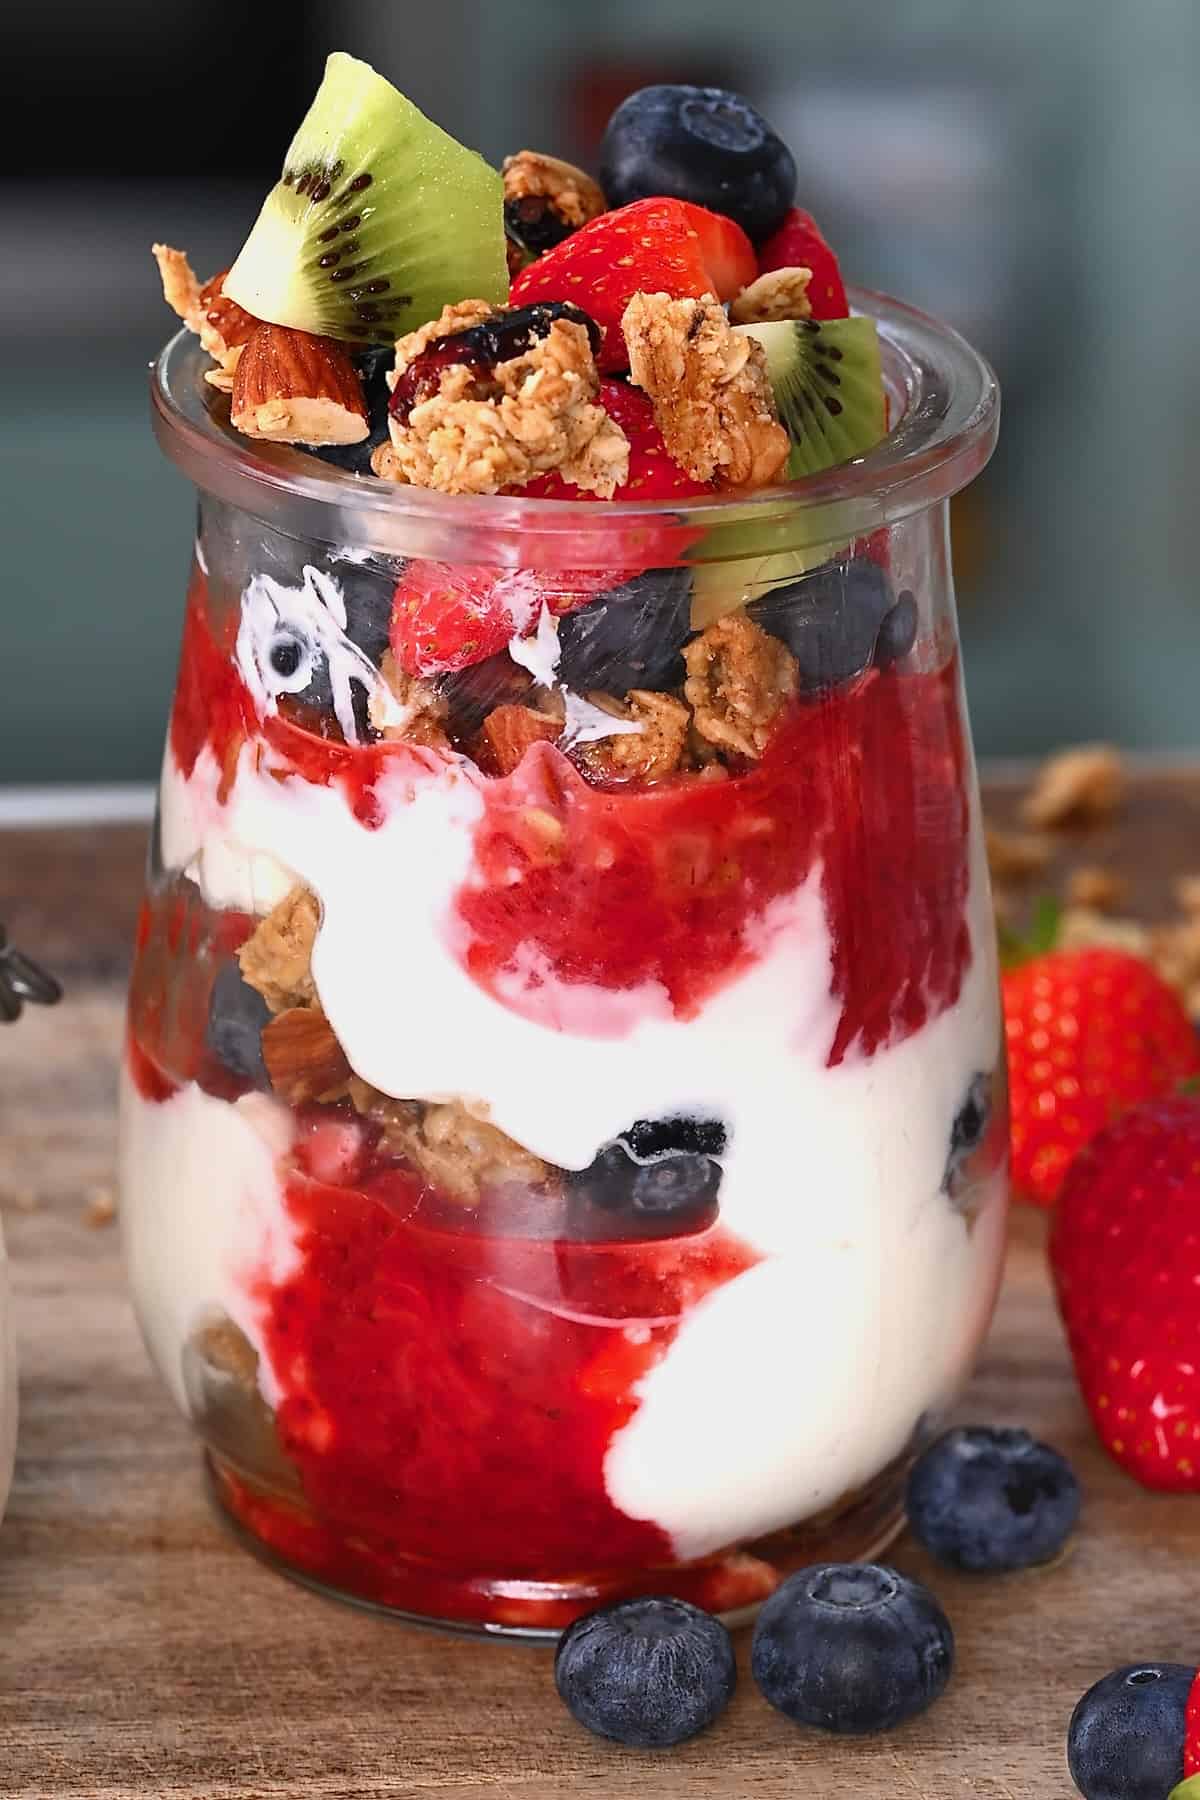 A small glass cup with yogurt parfait topped with berries and kiwi